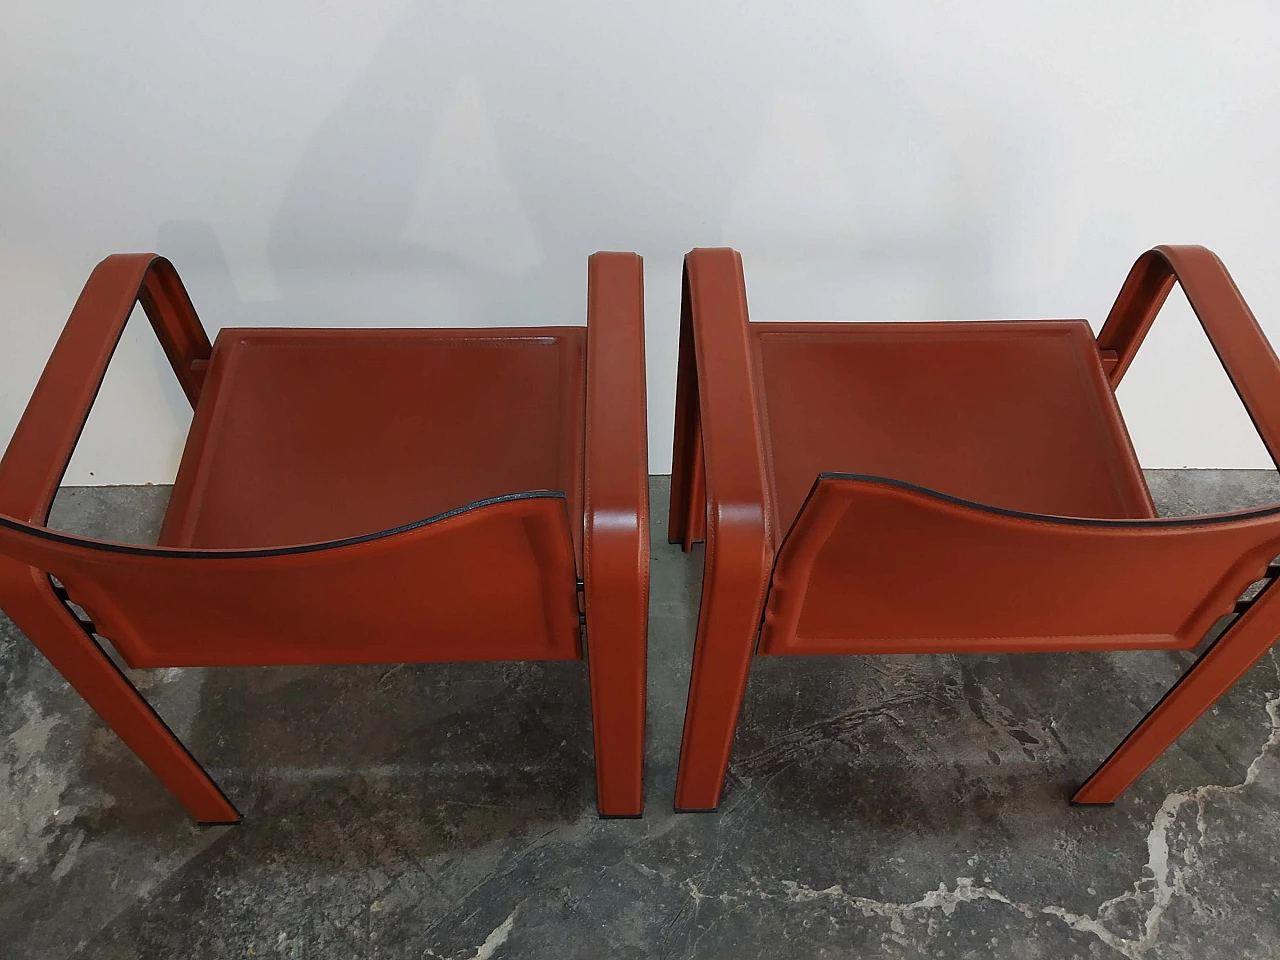 Pair of Golfo dei Poeti chairs by Toussaint & Angeloni manufactured by Matteo Grassi, 1980s 21